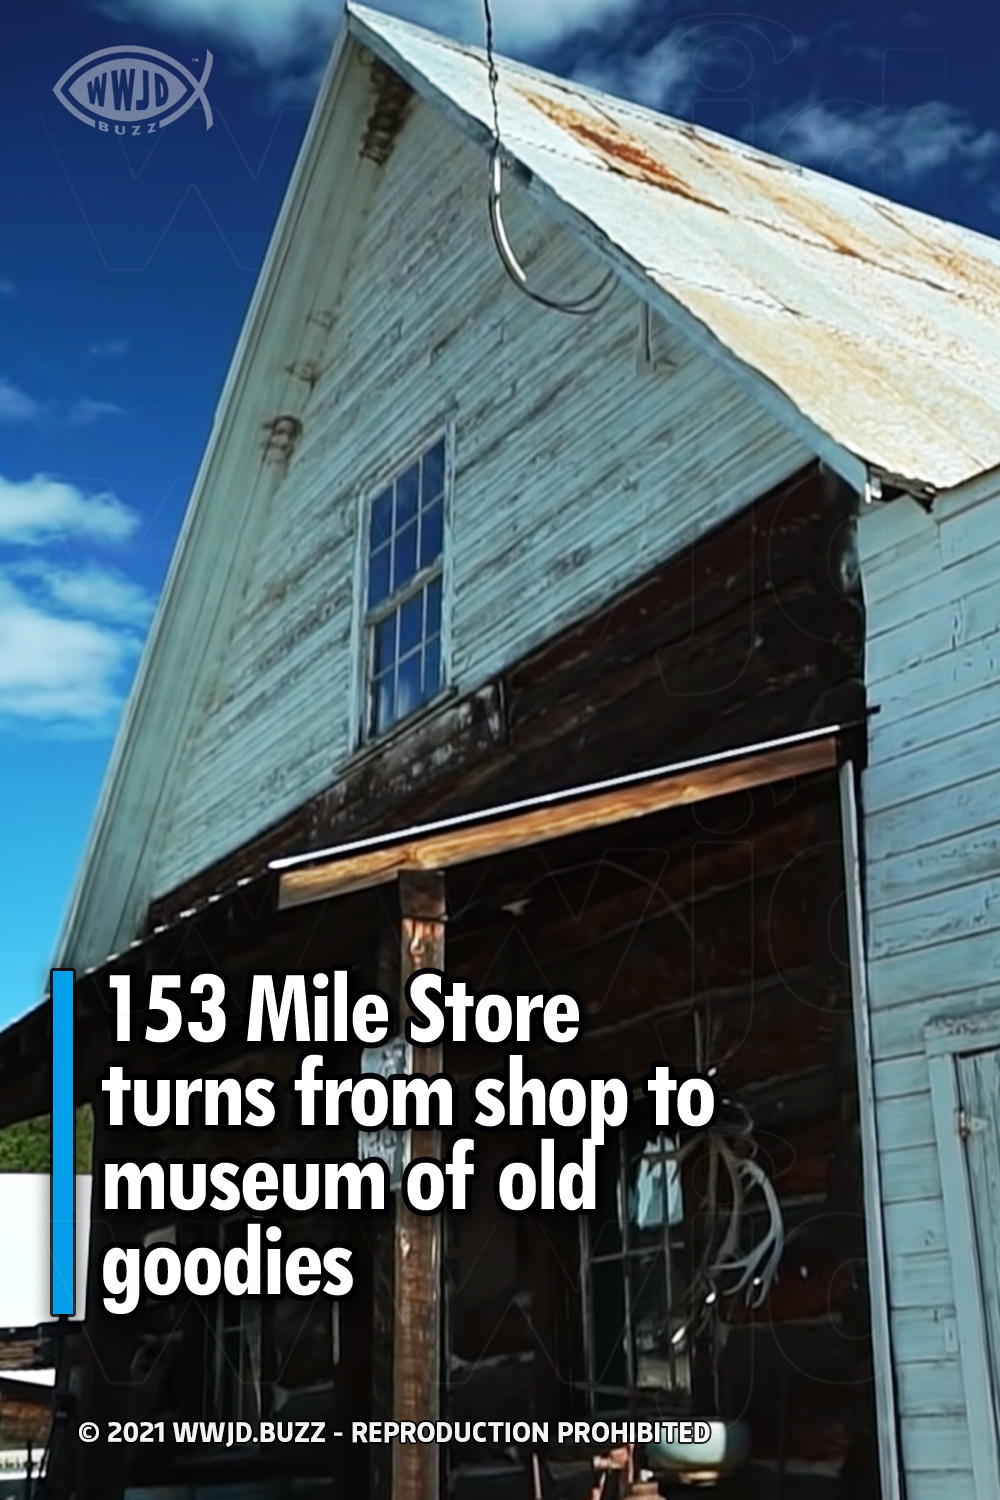 153 Mile Store turns from shop to museum of old goodies